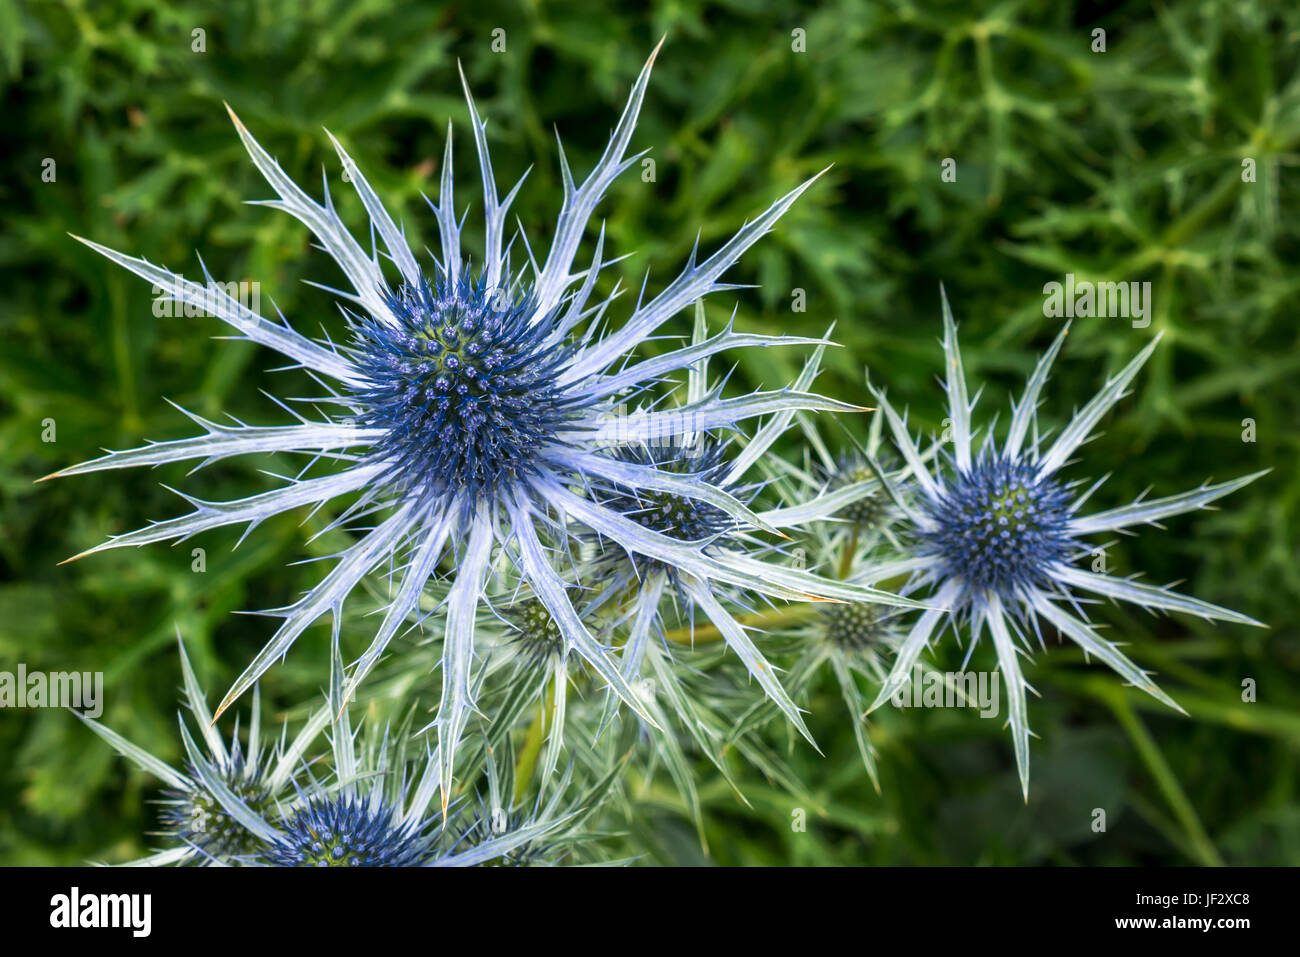 Close up of blue spiky sea holly, Eryngium Tripartitum, flowers with blurred background, Dirleton Castle Garden, East Lothian, Scotland, UK Stock Photo